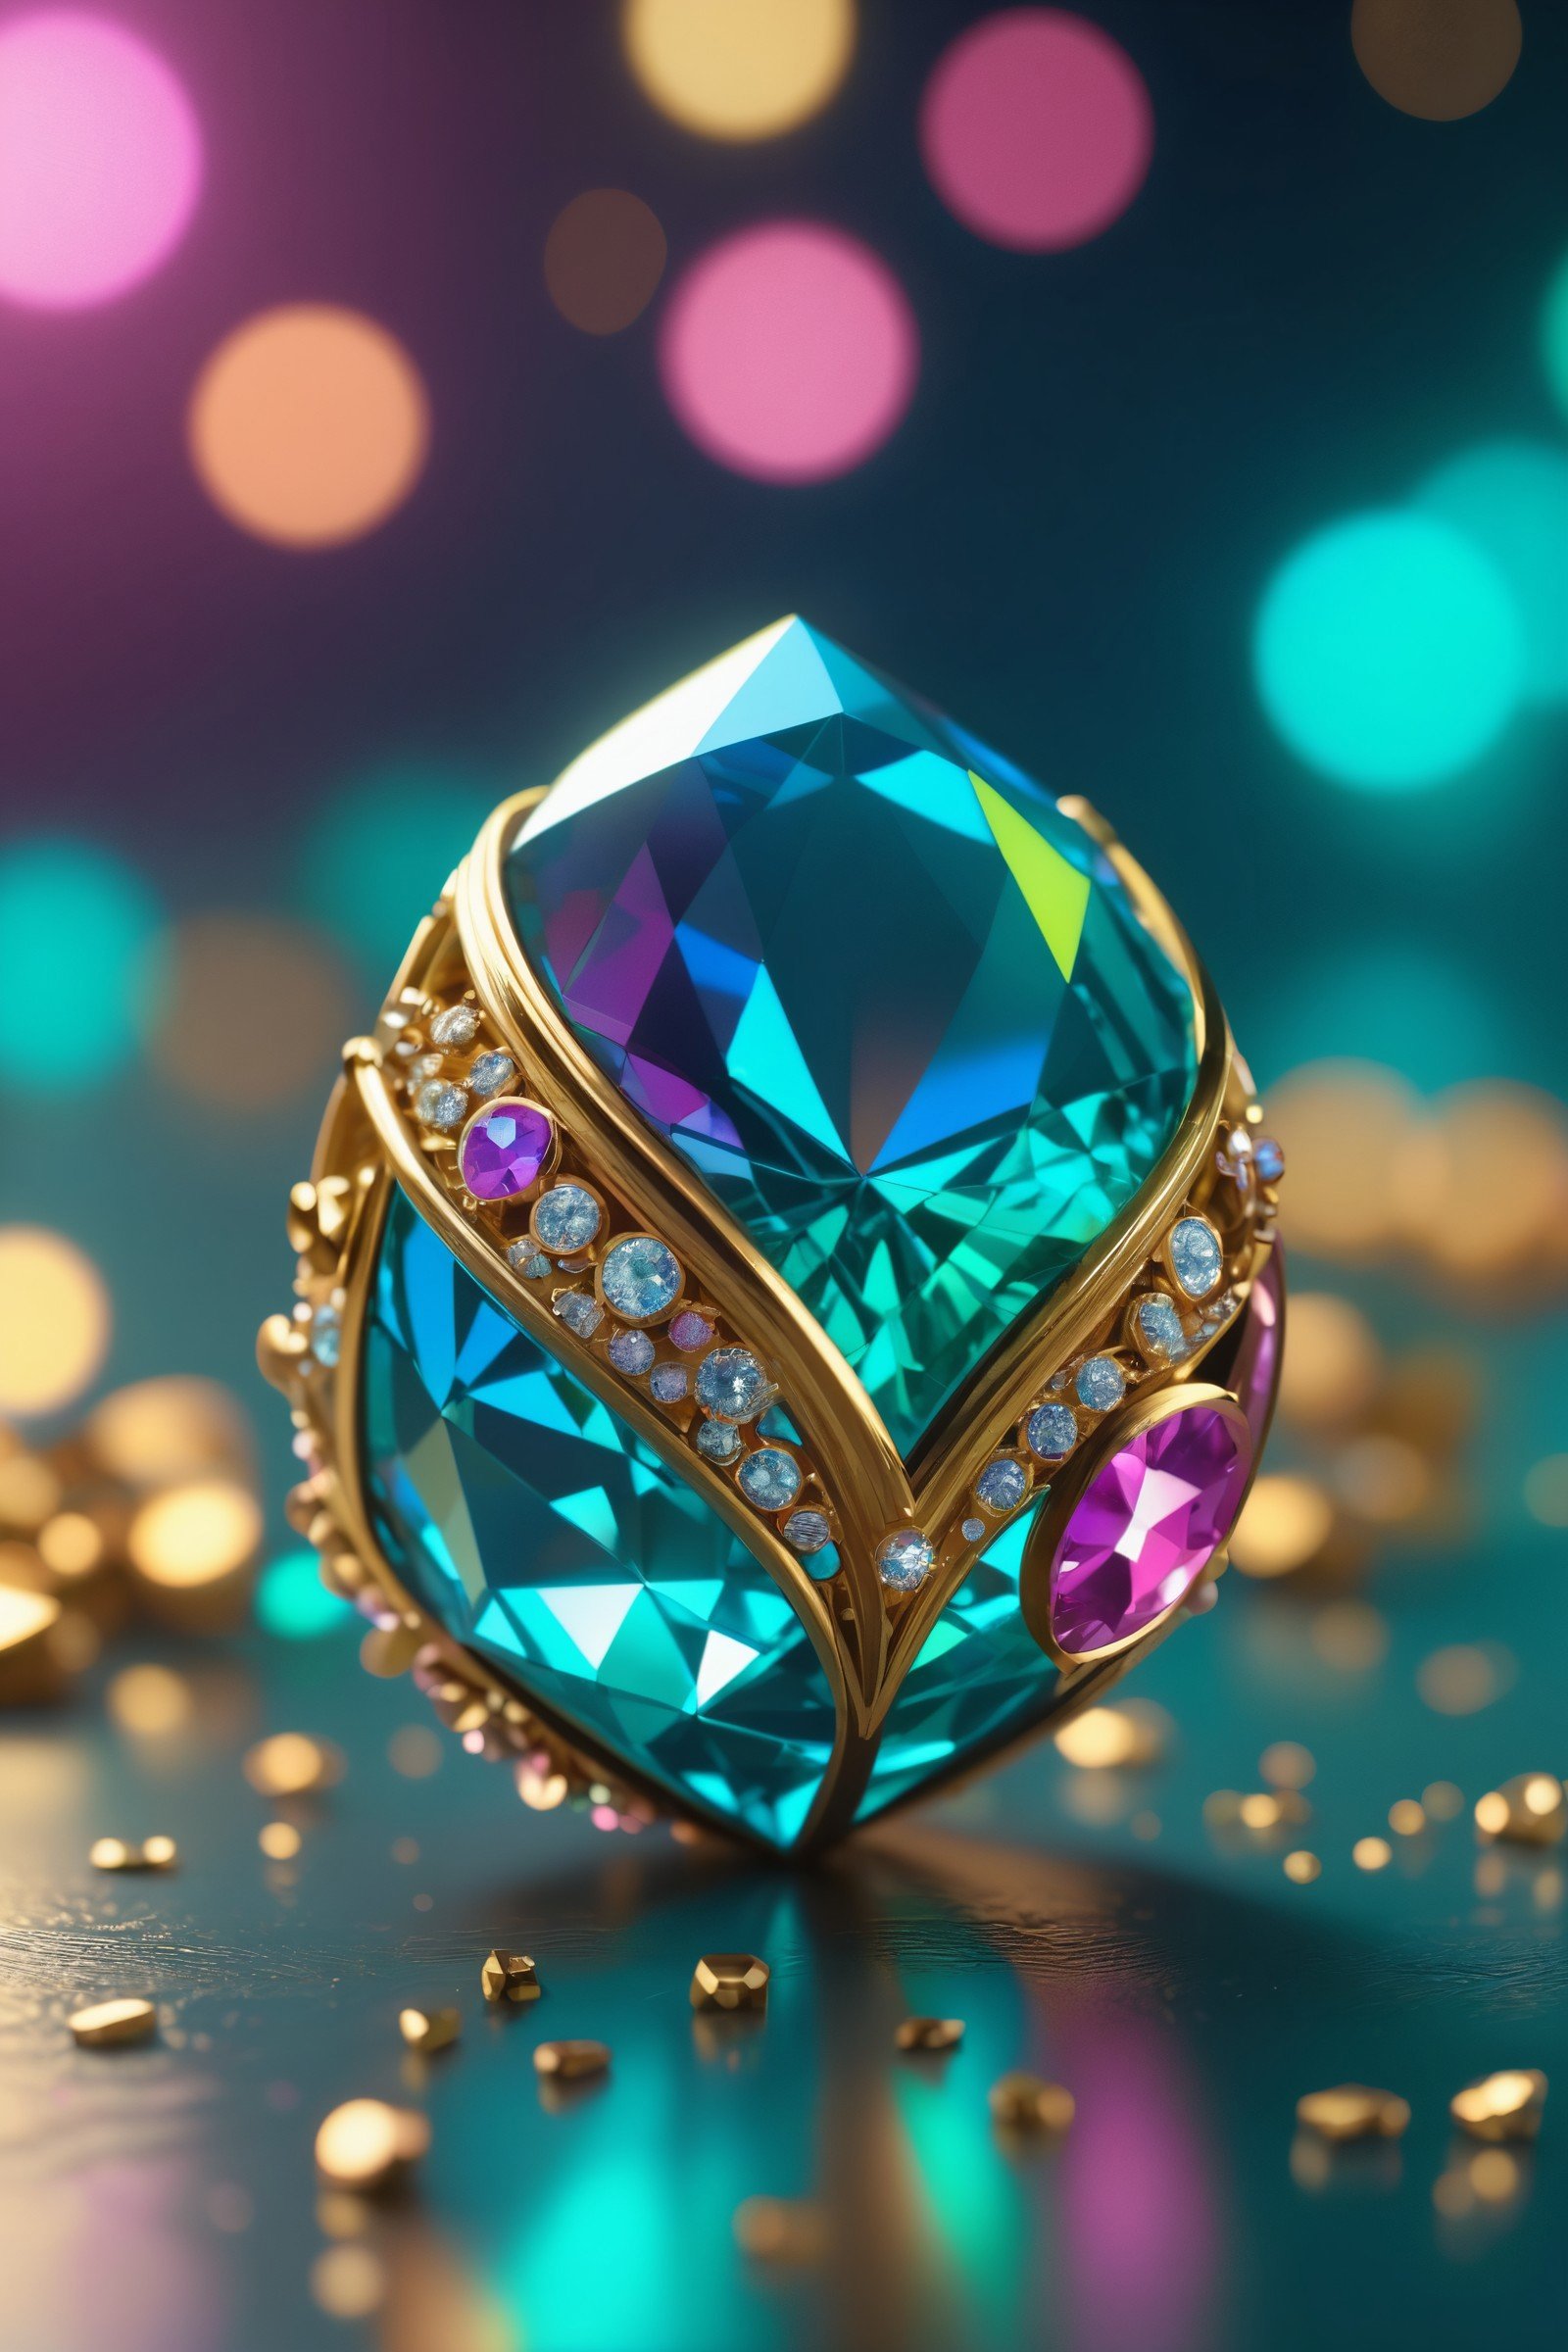 enigma, octane render, unreal engine, cinematic, hyper realism, 16k, depth of field, bokeh. iridescent accents. vibrant. teal and gold and diamond blue and pink and green scheme